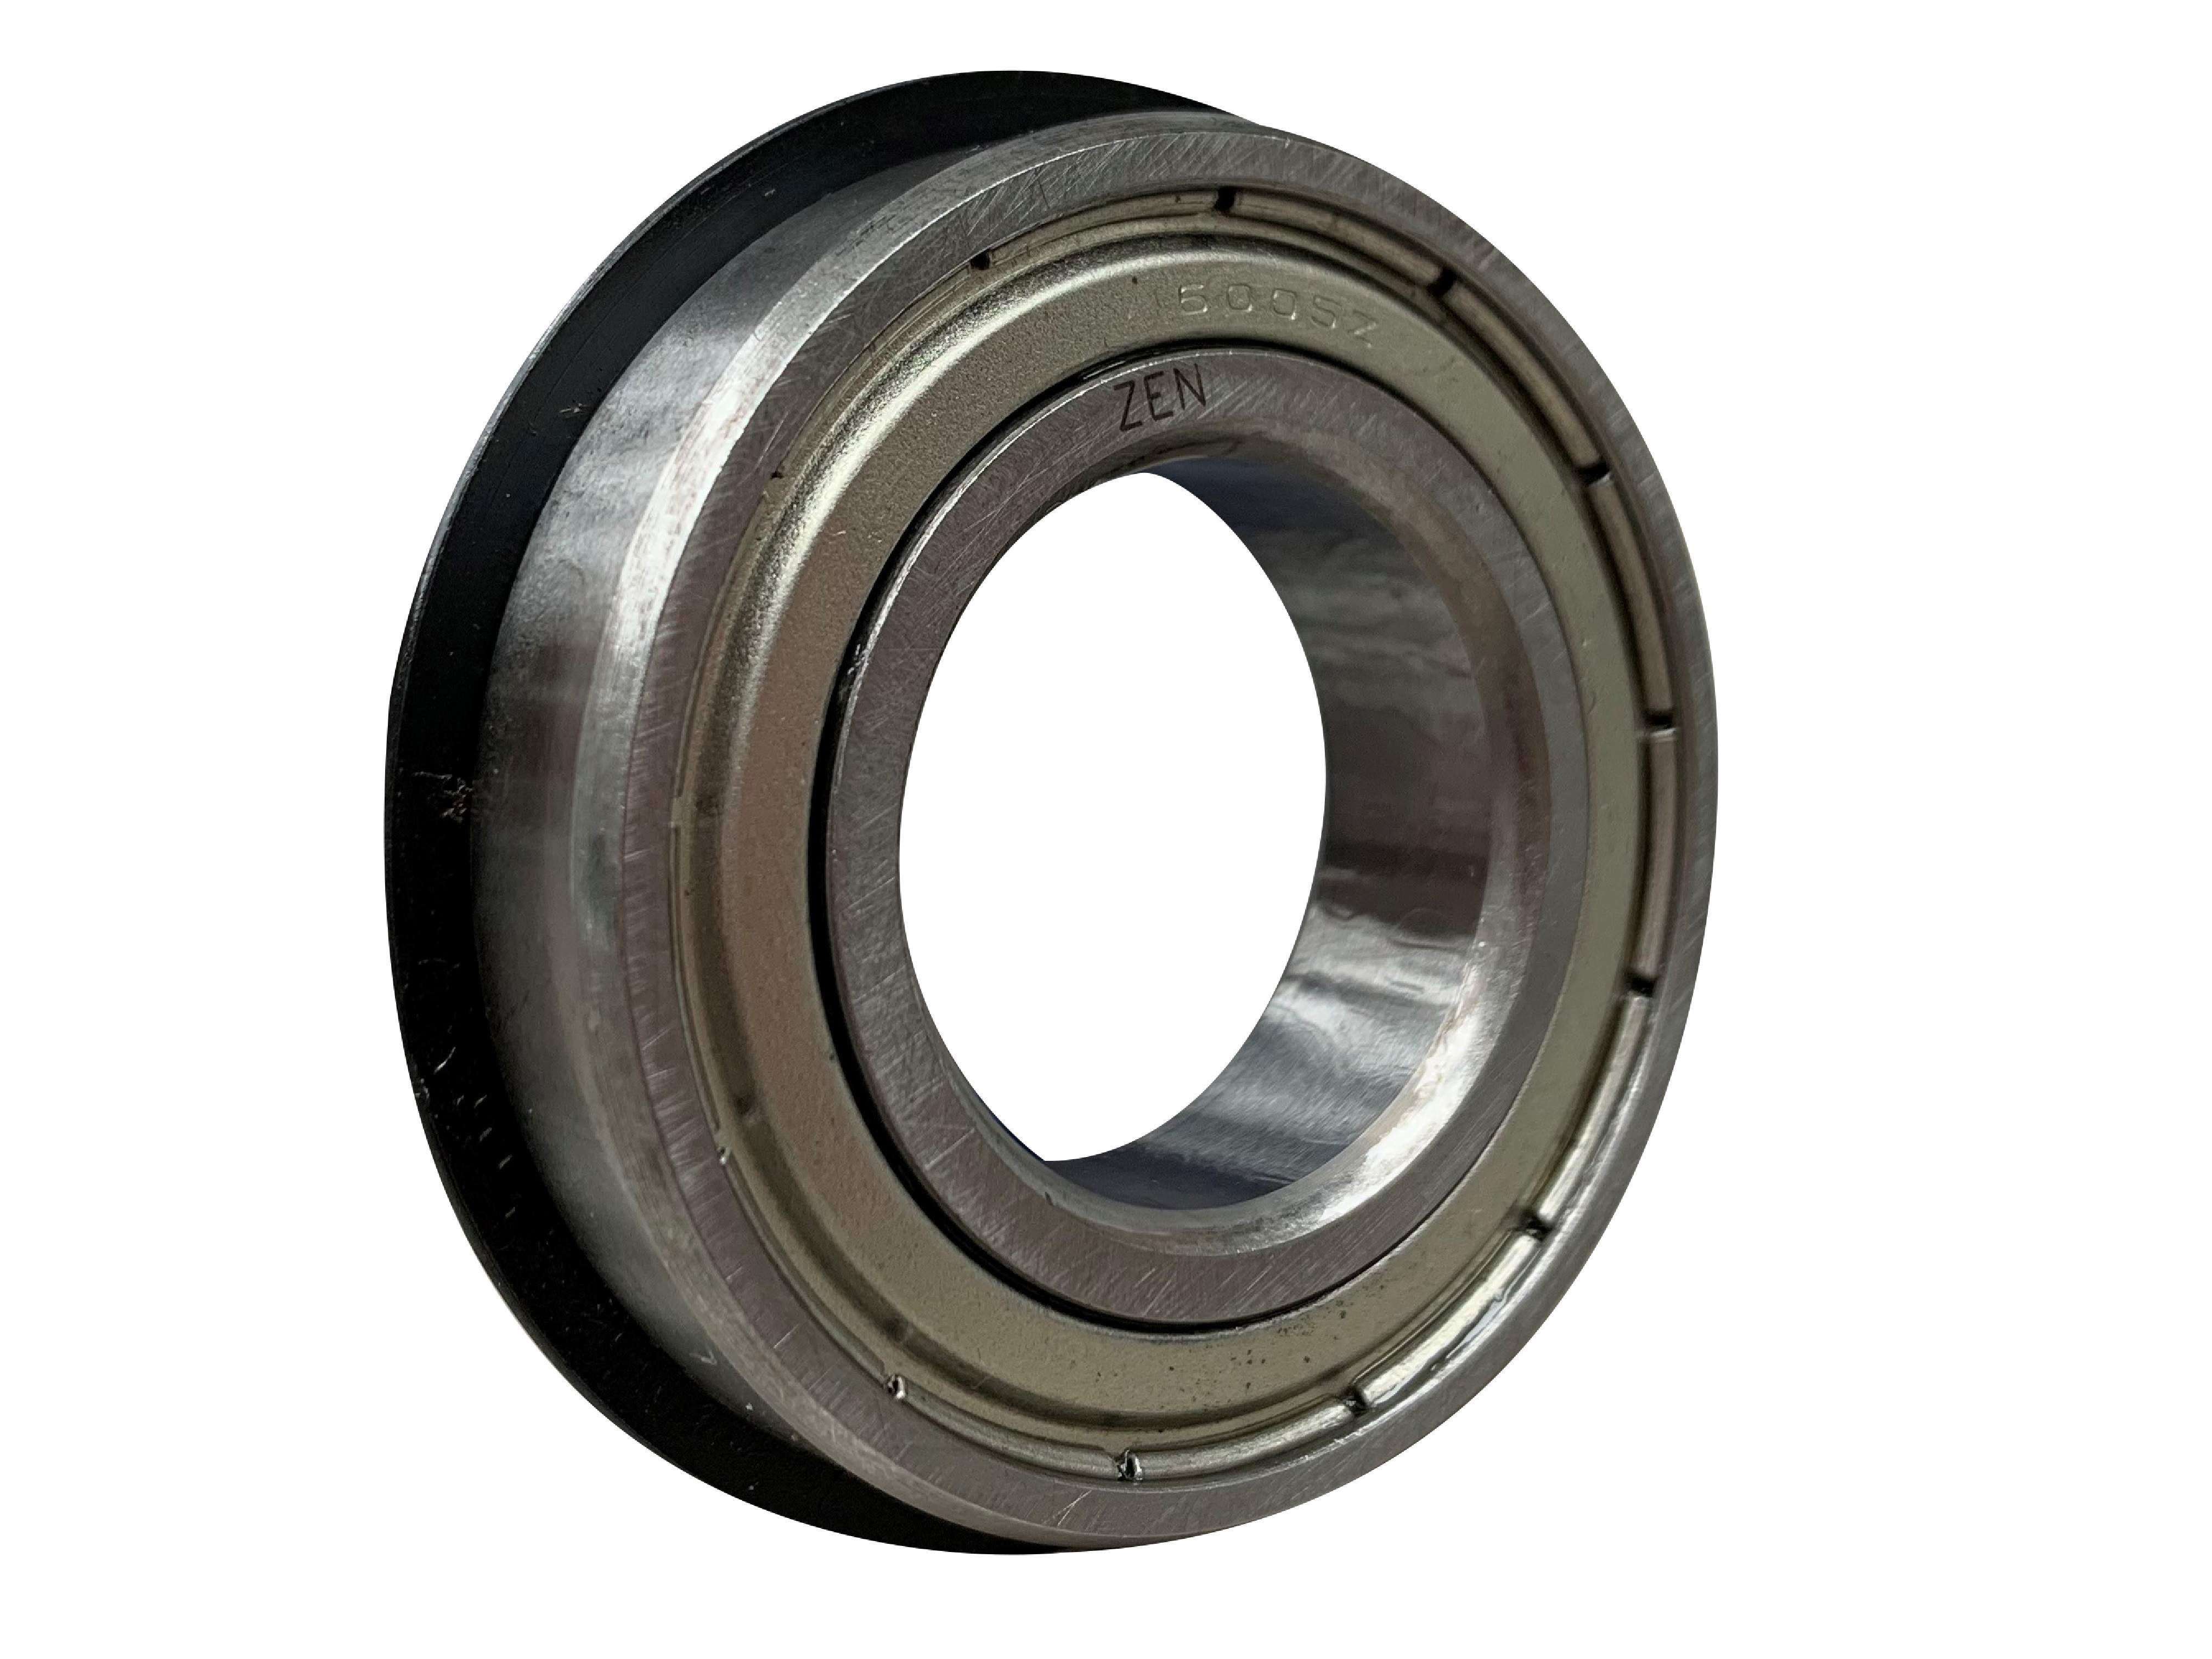 ZEN 6003-2Z-NR Shielded Ball Bearing With Snap Ring 17mm x 35mm x 10mm